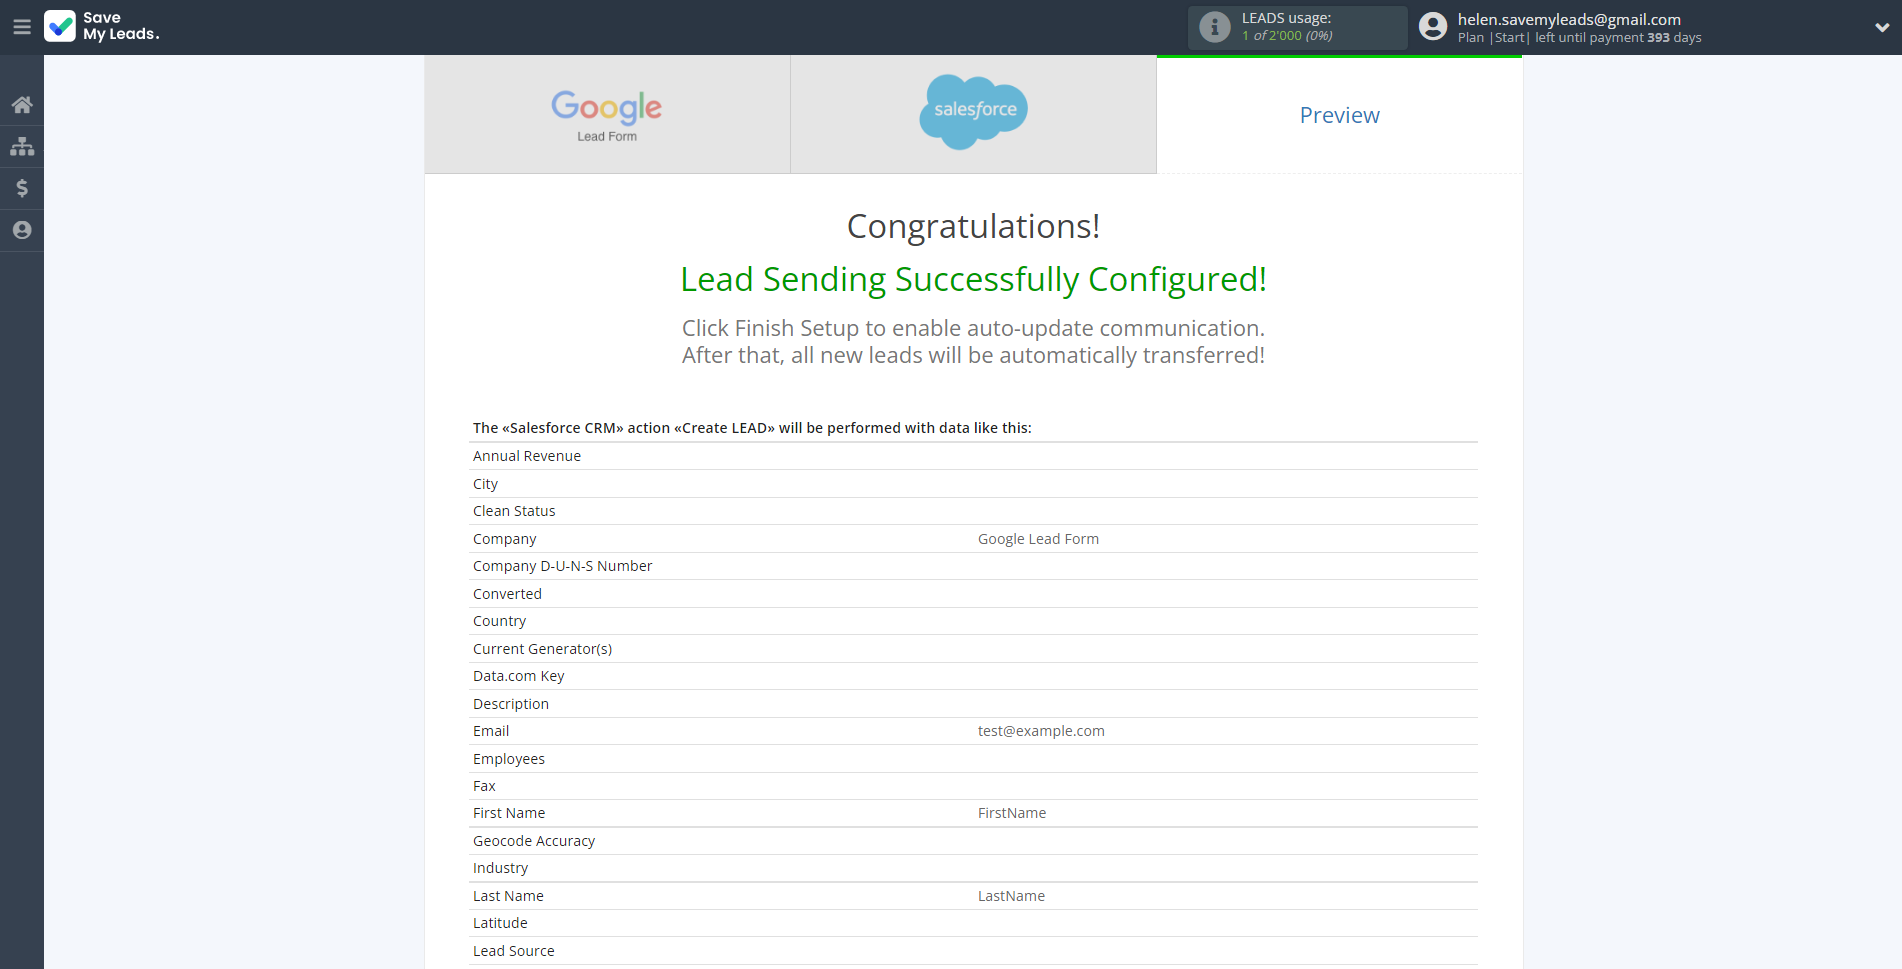 How to Connect Google Lead Form with Salesforce CRM Create Lead | Test data